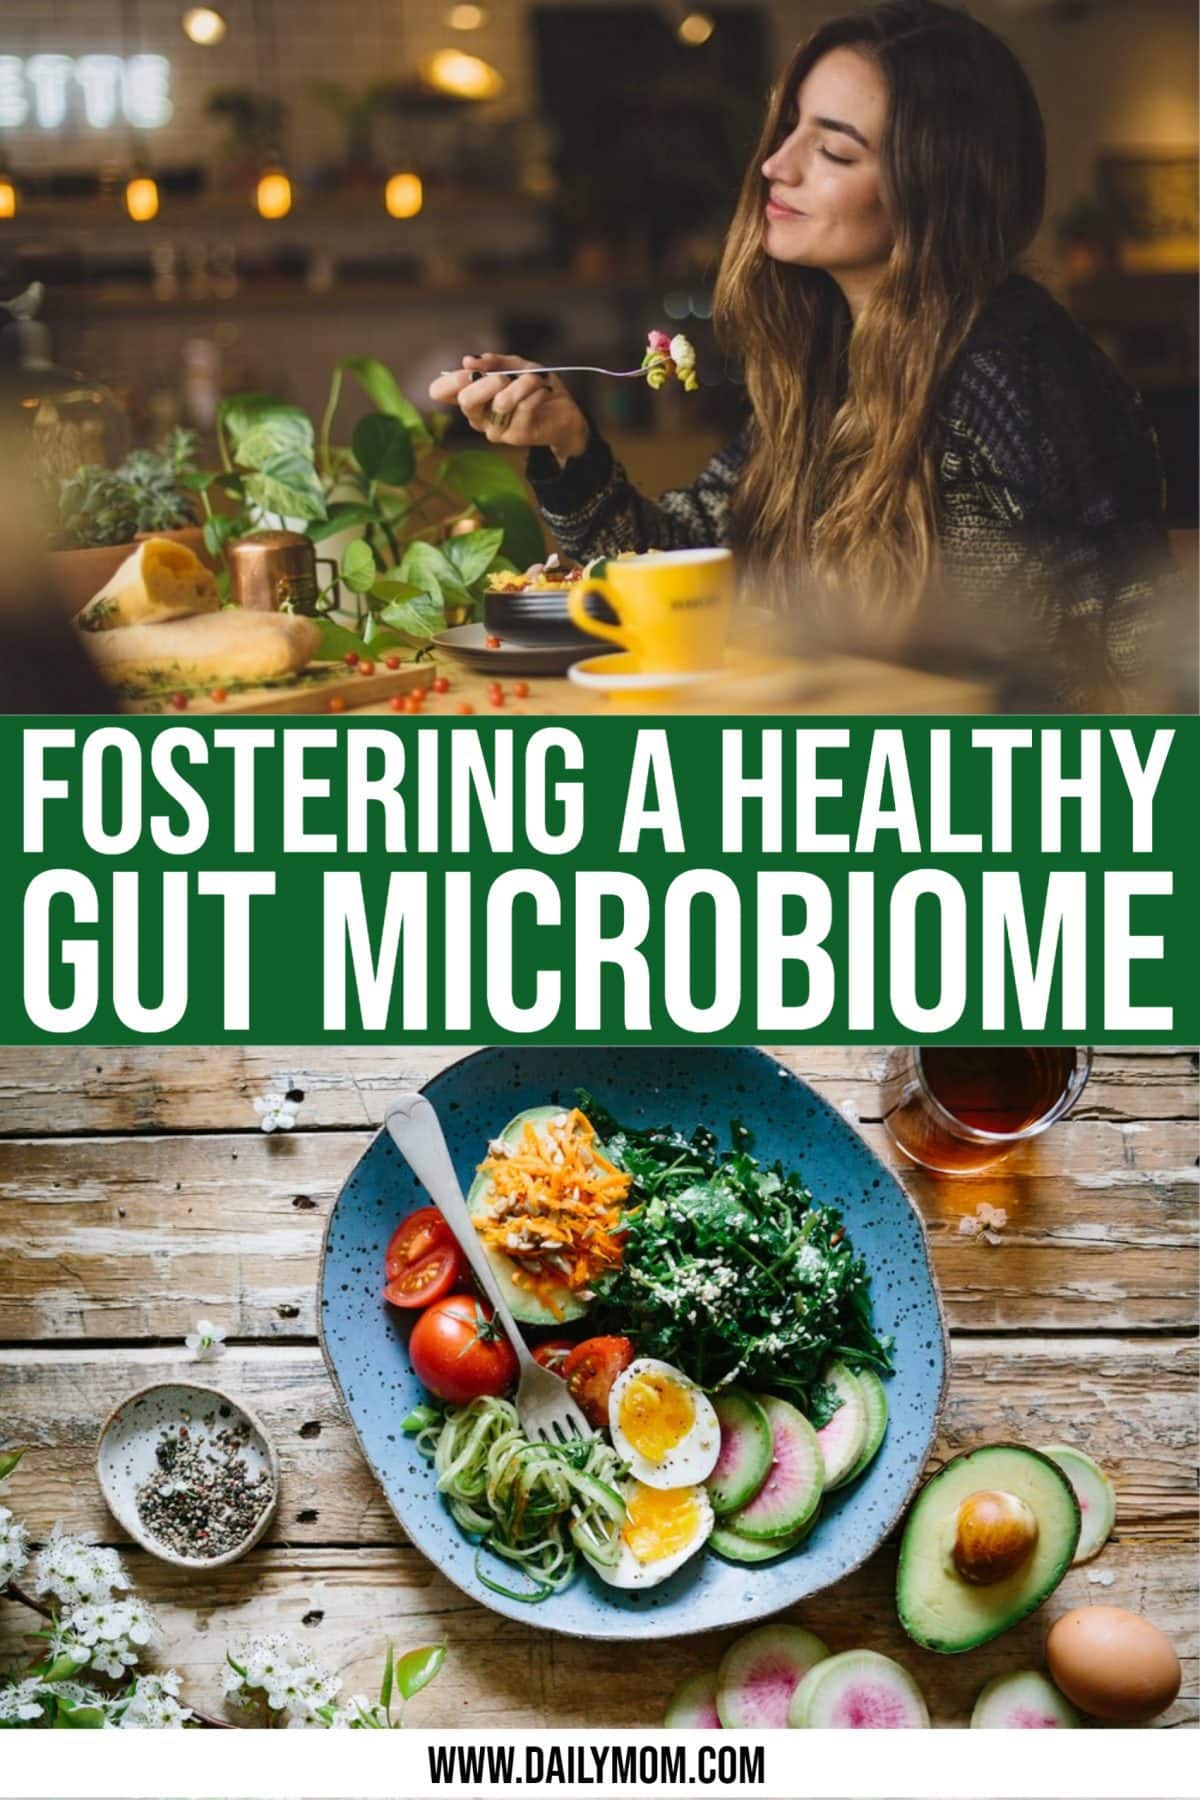 Tips For Fostering A Healthy Gut Microbiome